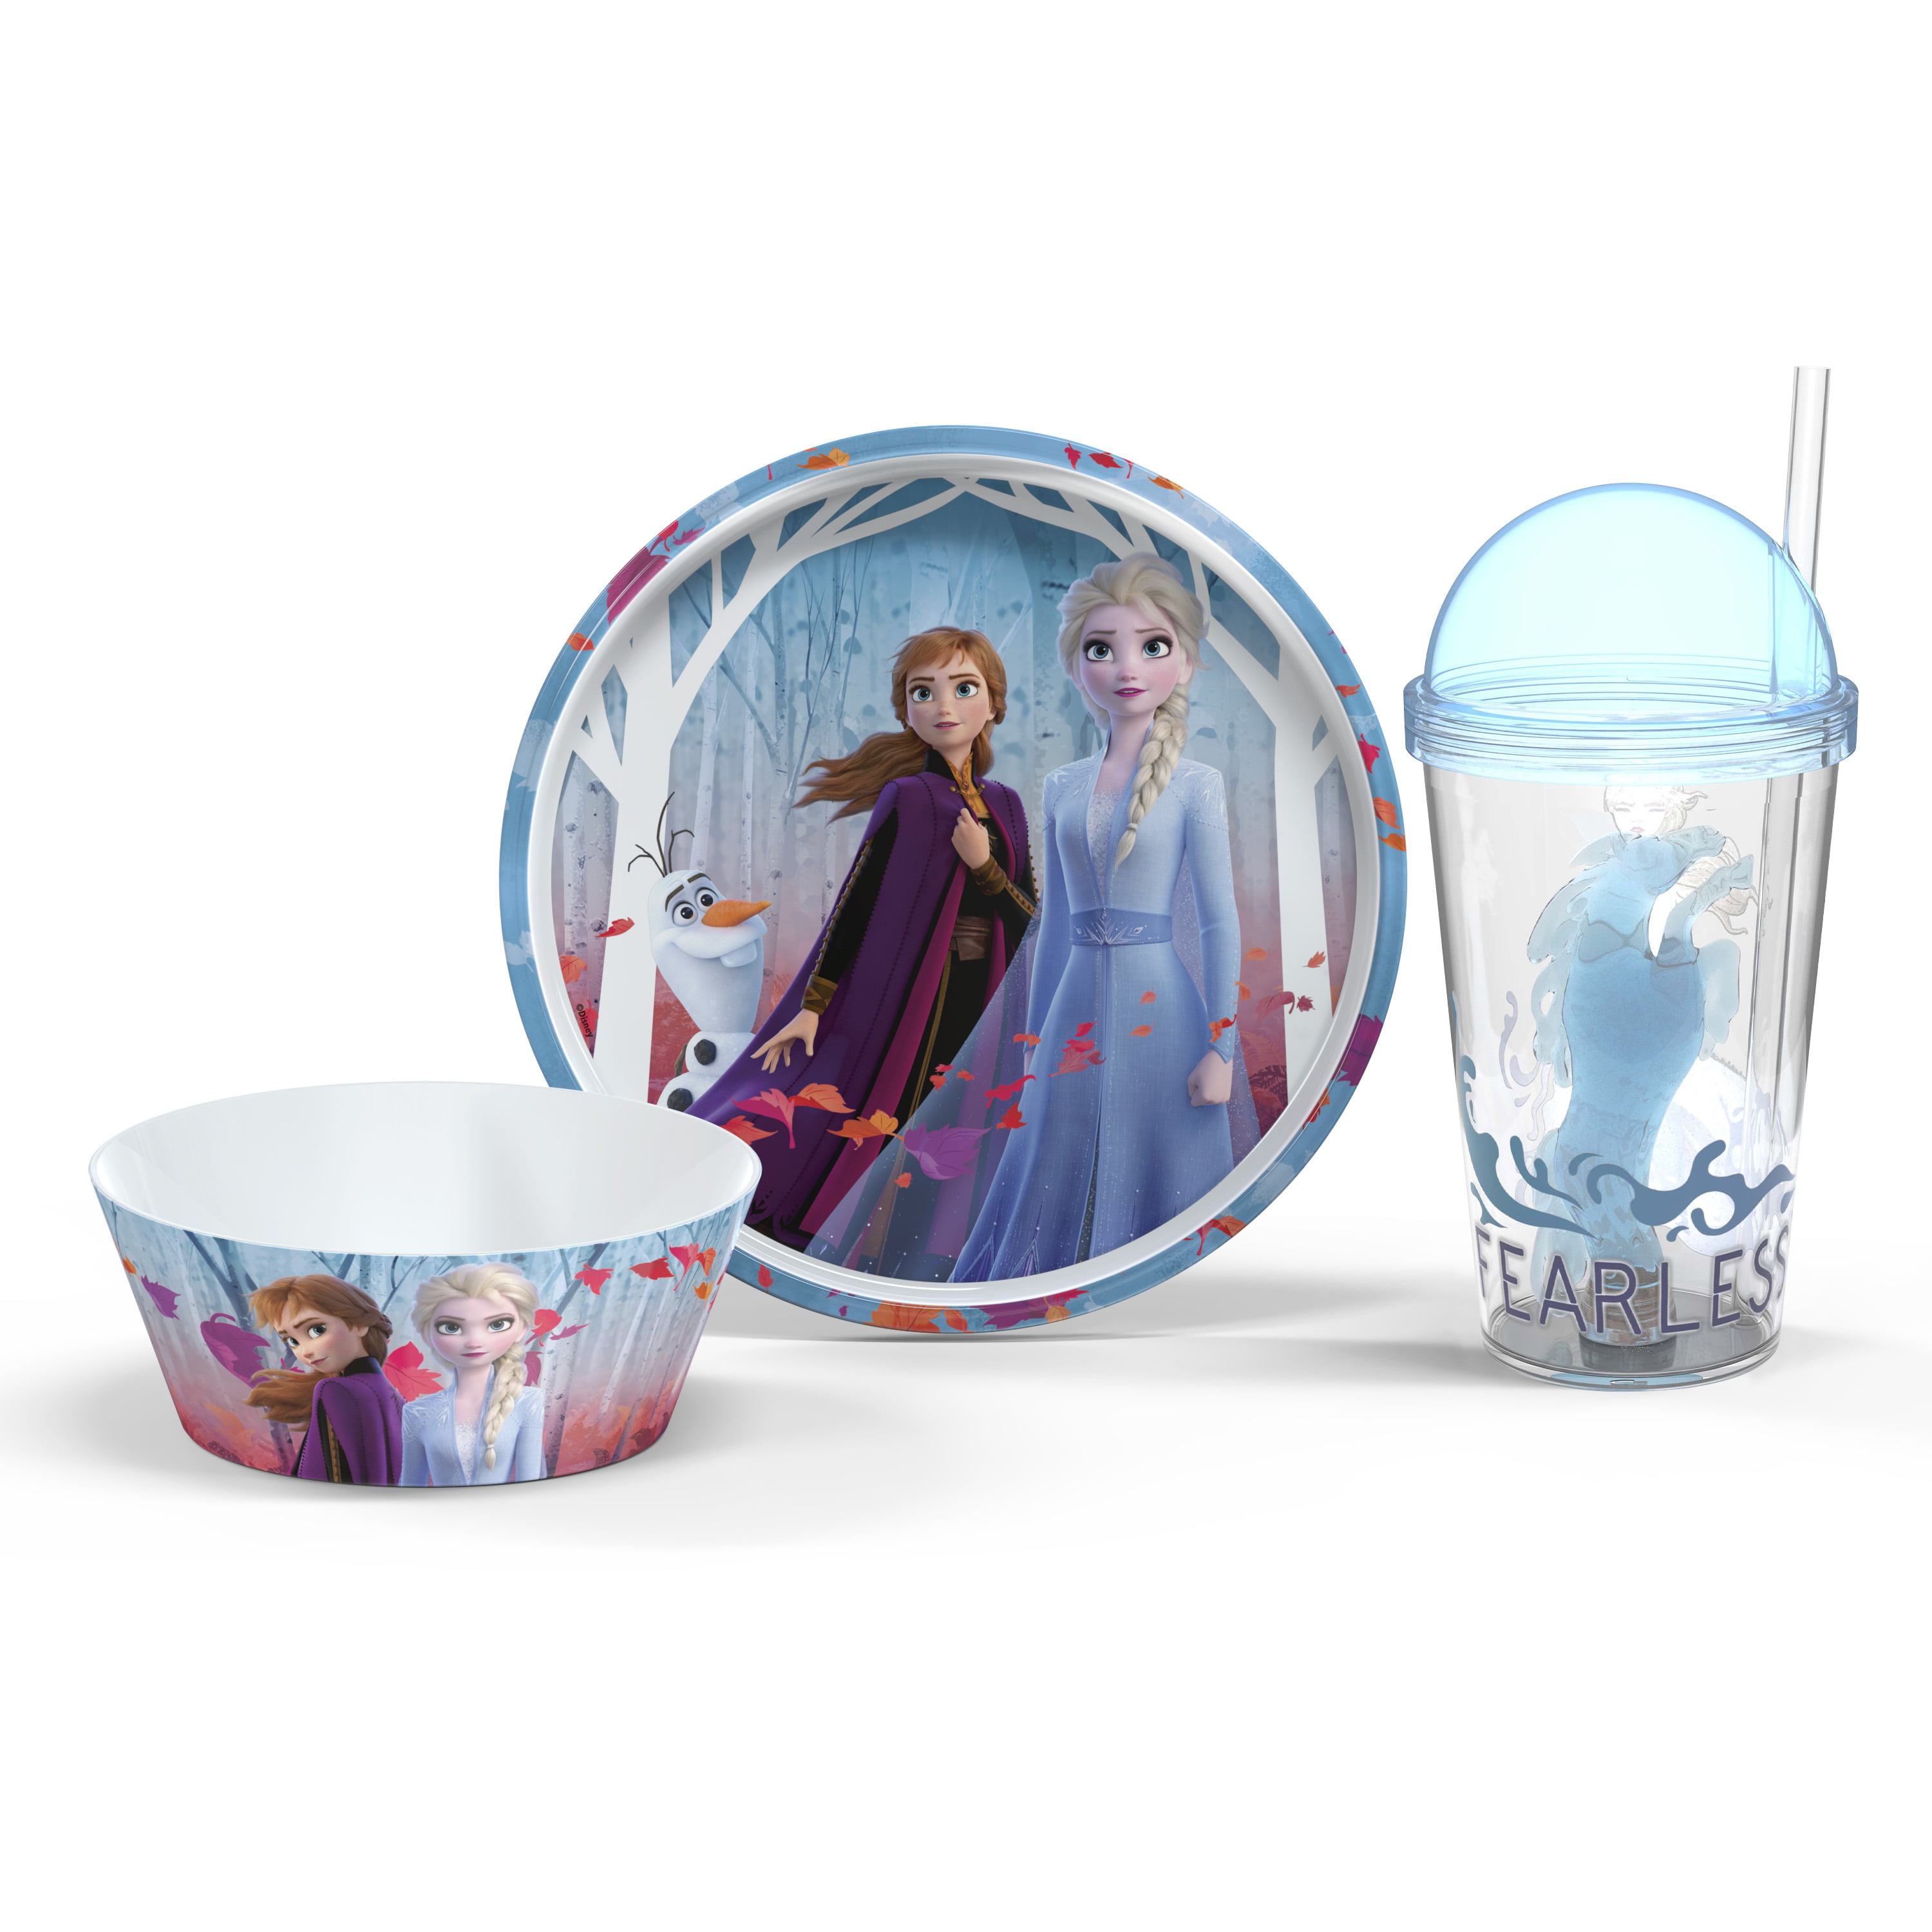 Dishwasher Safe Consisting of Plate POS 24508 Breakfast Set with Disney Frozen Motif Ceramic Bowl and Cup 3-Piece Tableware Set for Children 